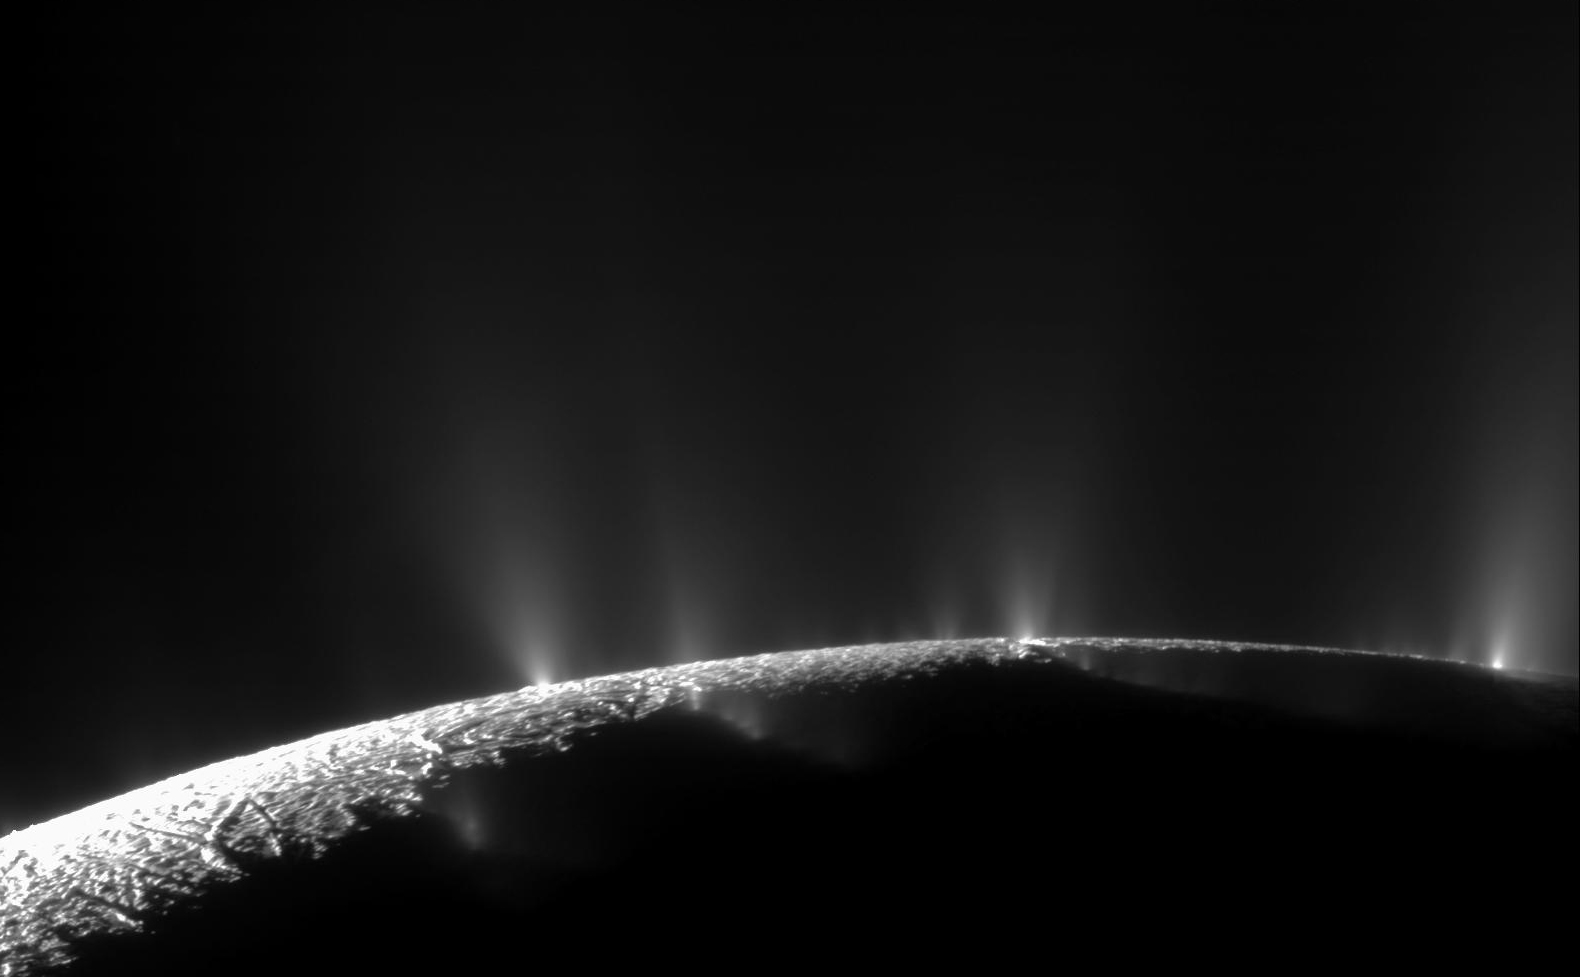 Dramatic plumes, both large and small, spray water ice out from many locations along the famed "tiger stripes" near the south pole of Saturn's moon Enceladus.